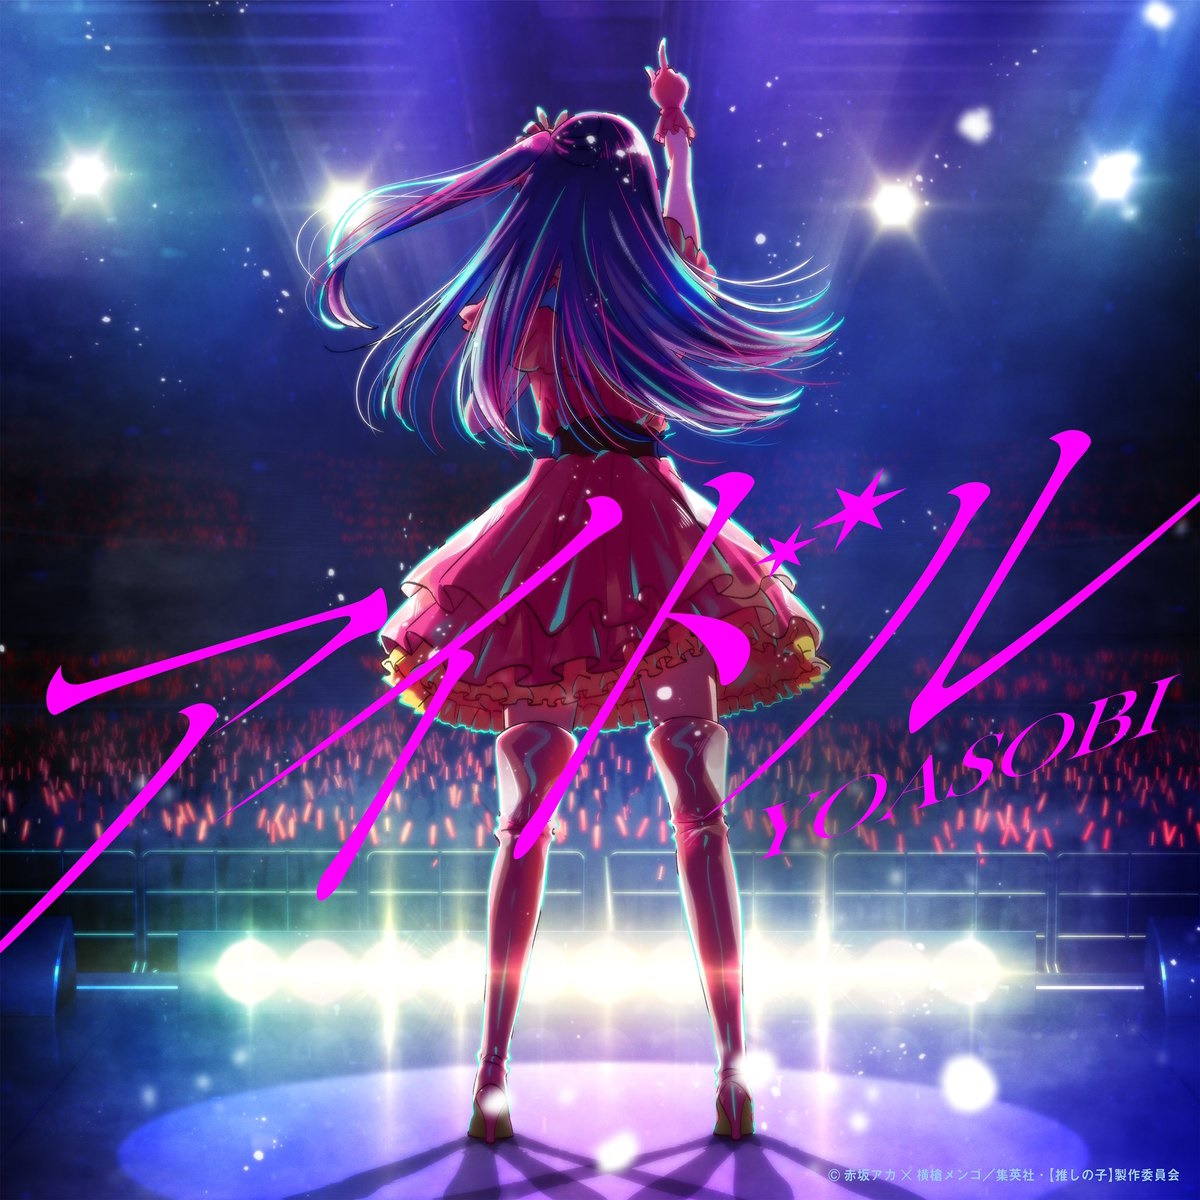 Cover image of『YOASOBIIdol』from the Album『Idol』